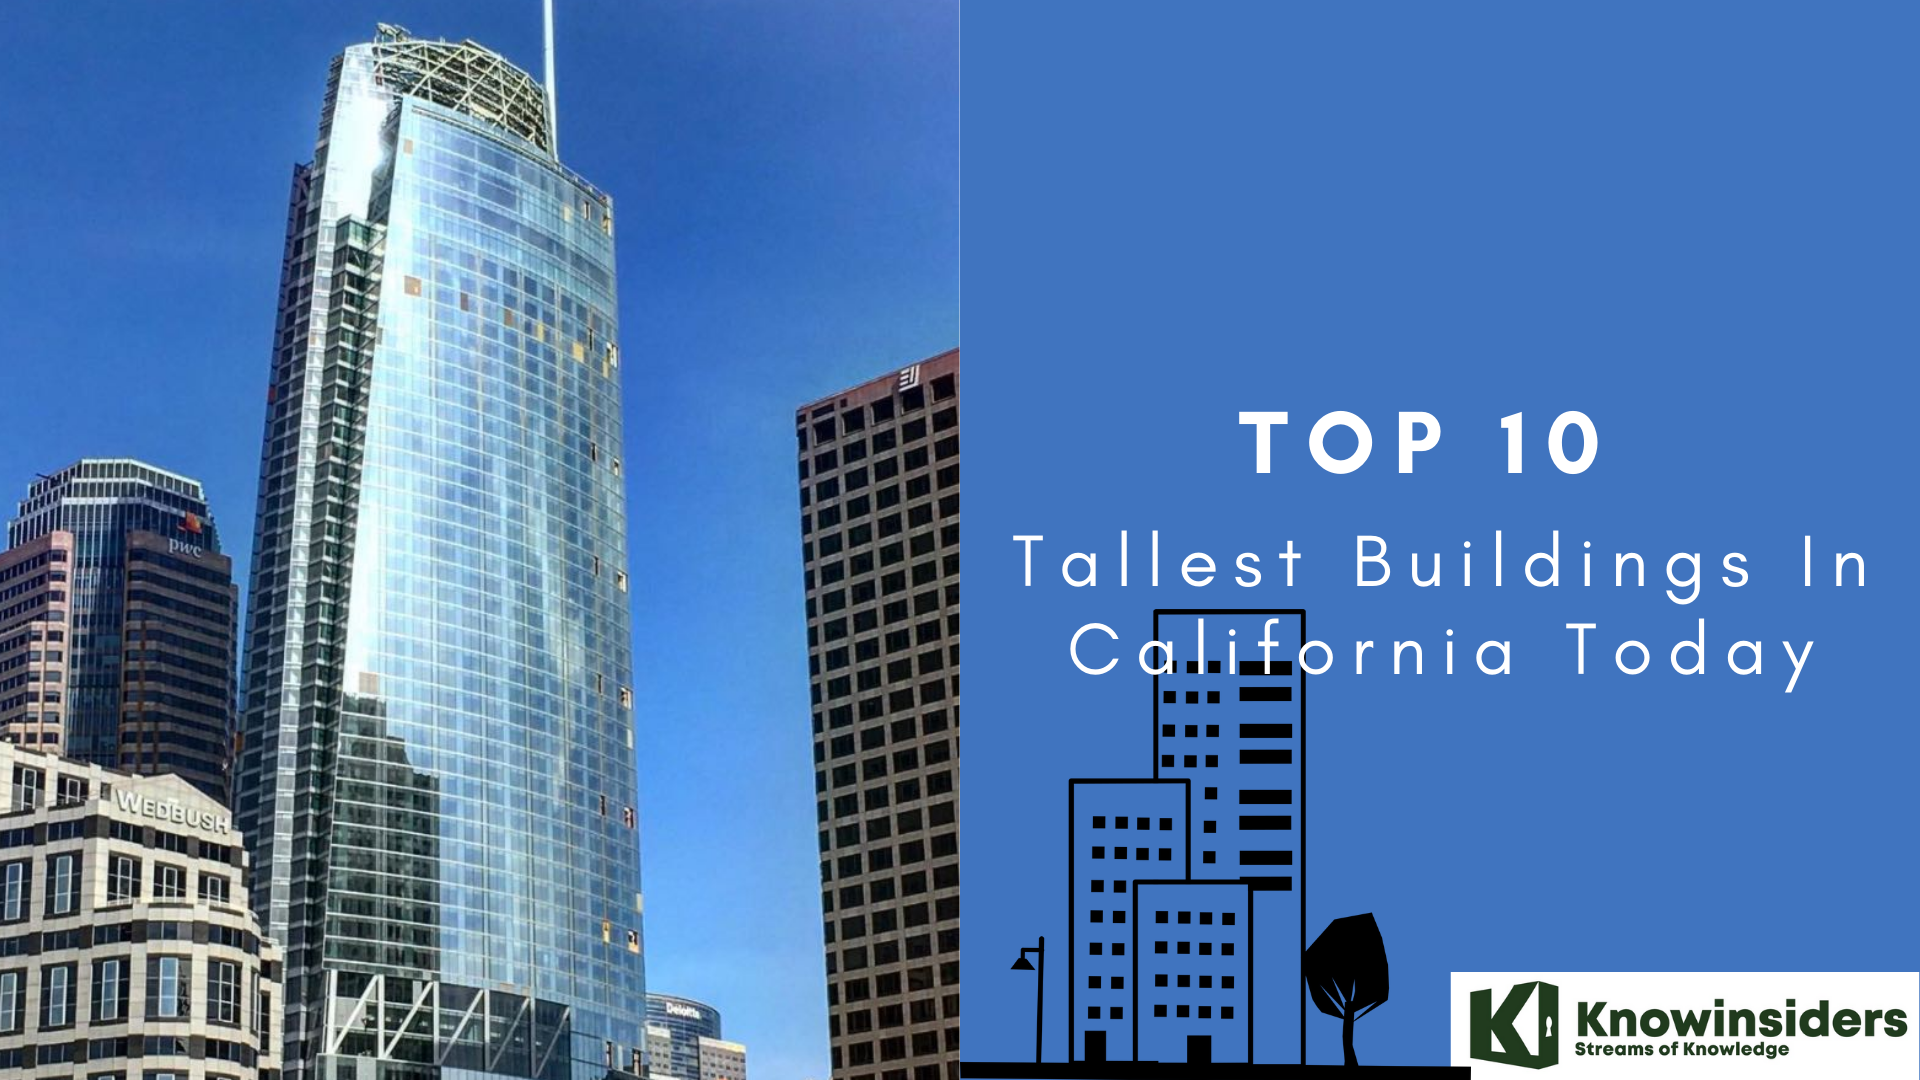 Tallest Buildings In California Today